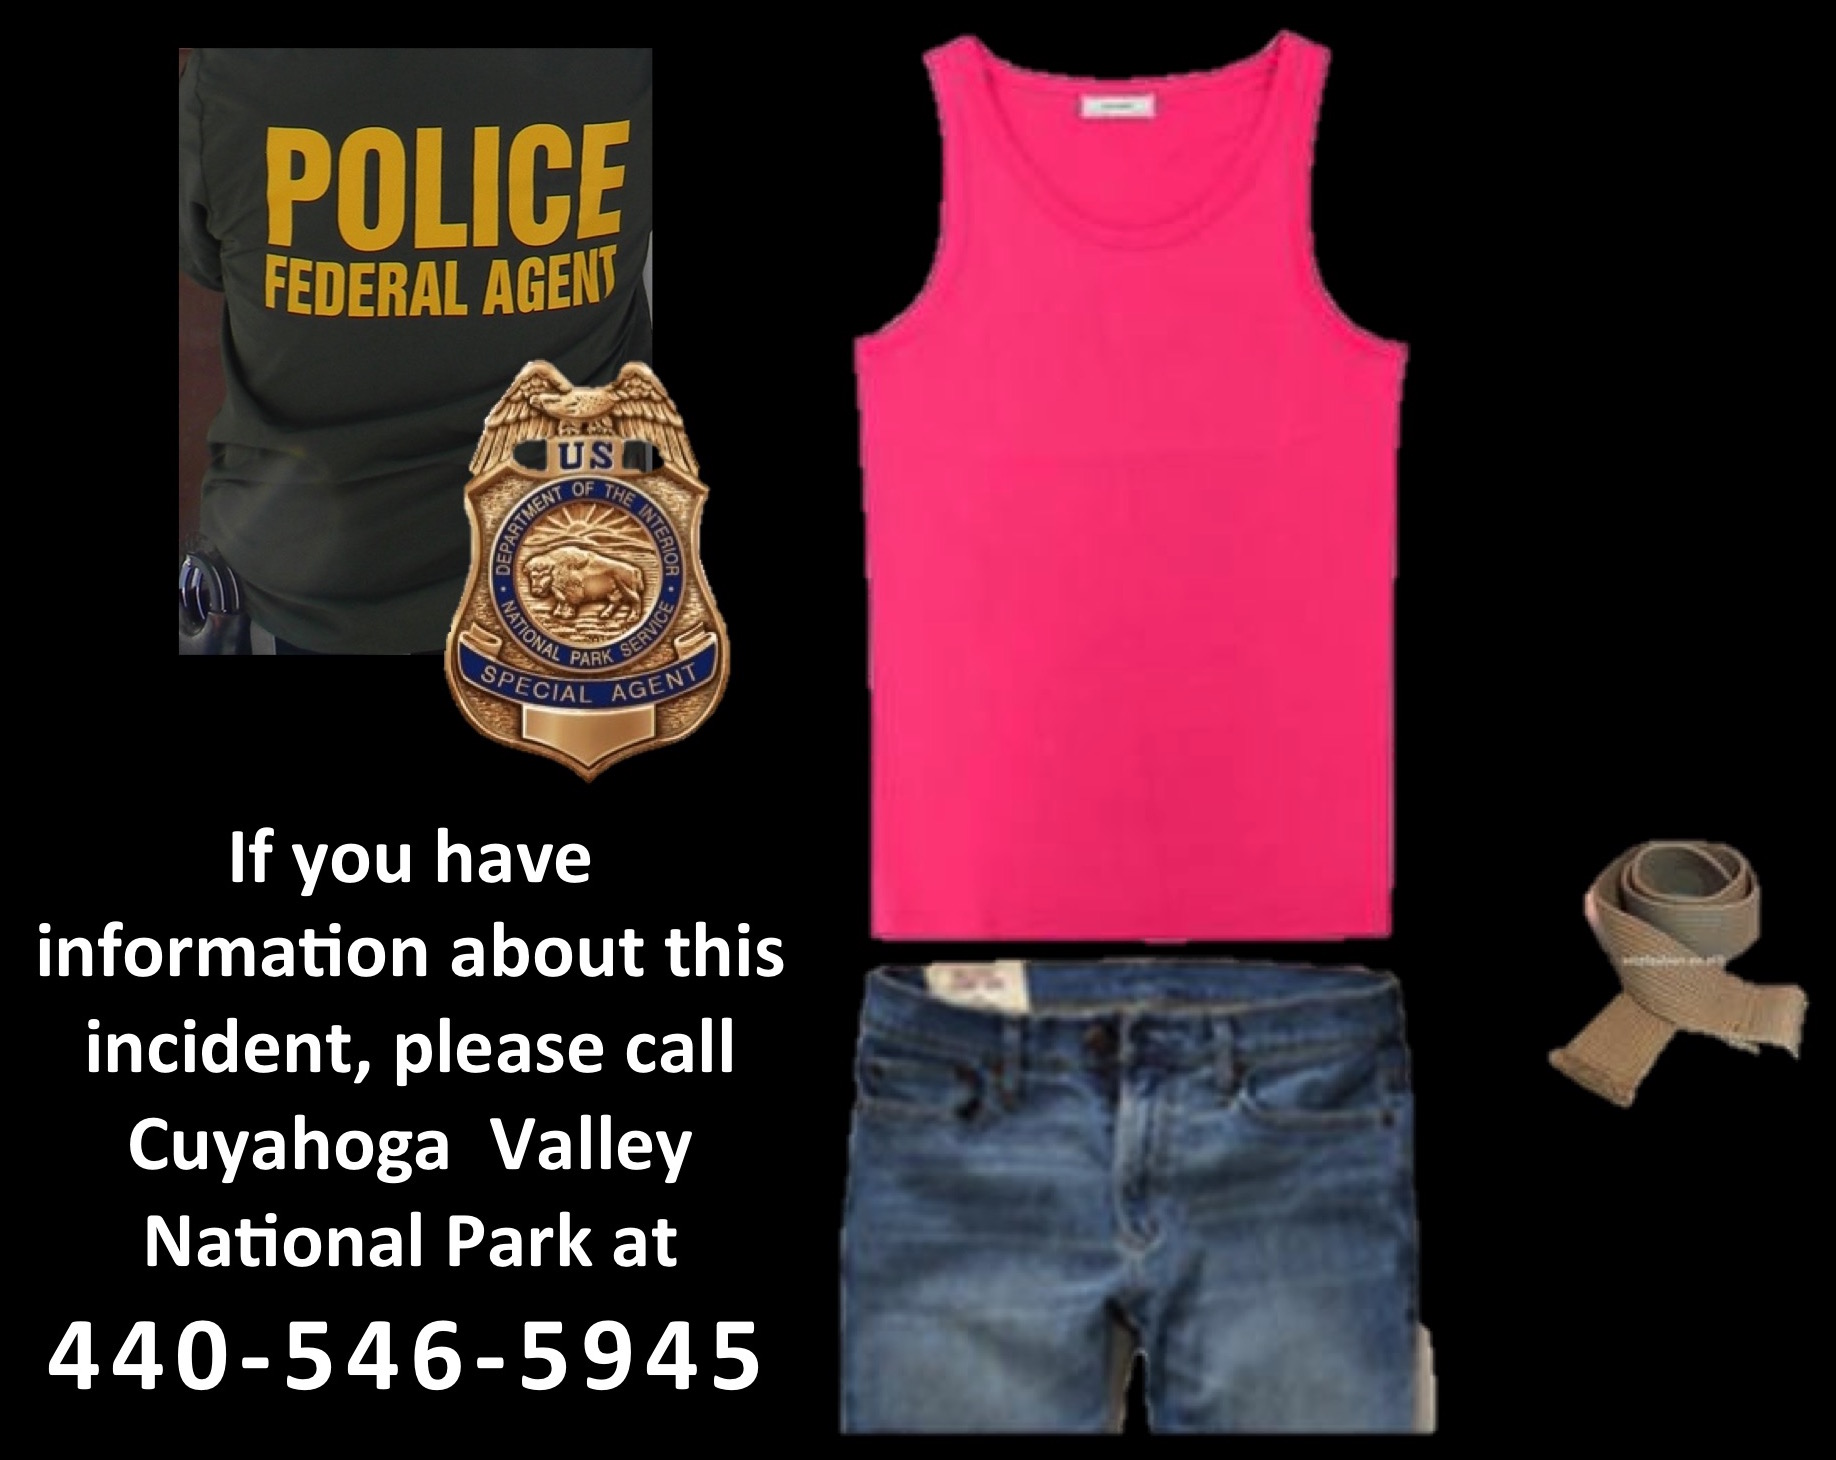 The victim was found wearing a pink tank top, blue cut-off shorts, a khaki belt, and white sneakers. NPS image of similar clothing.